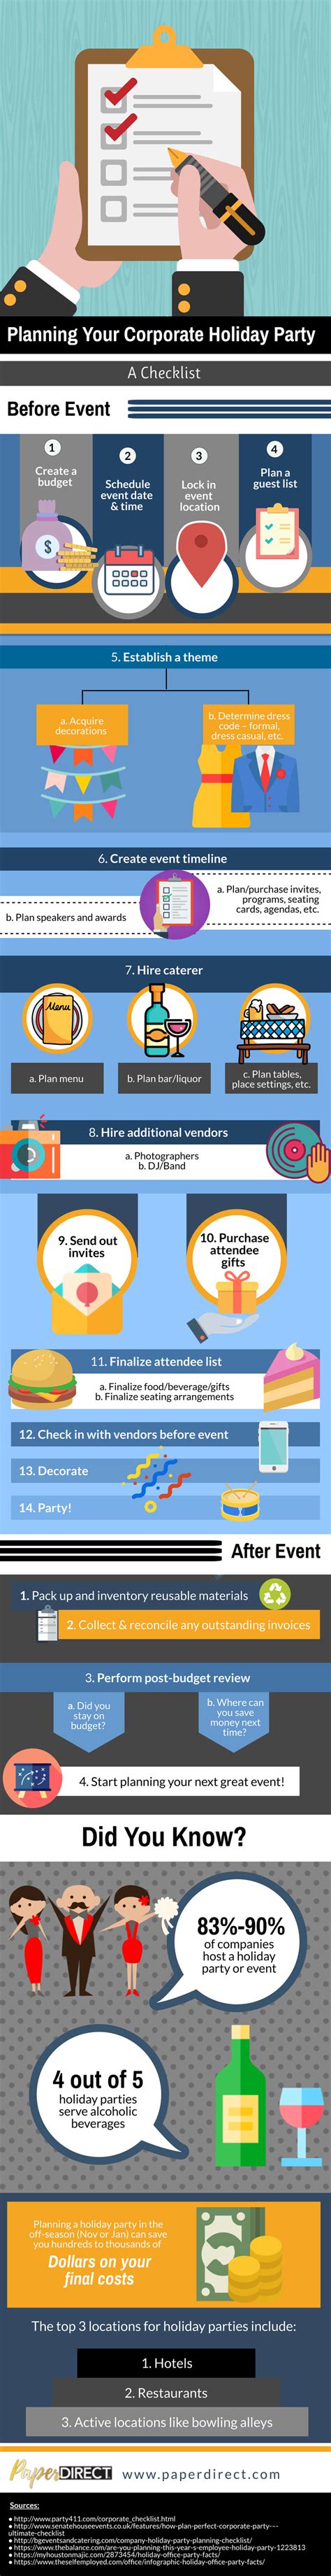 planning a corporate holiday party infographic paperdirect blog